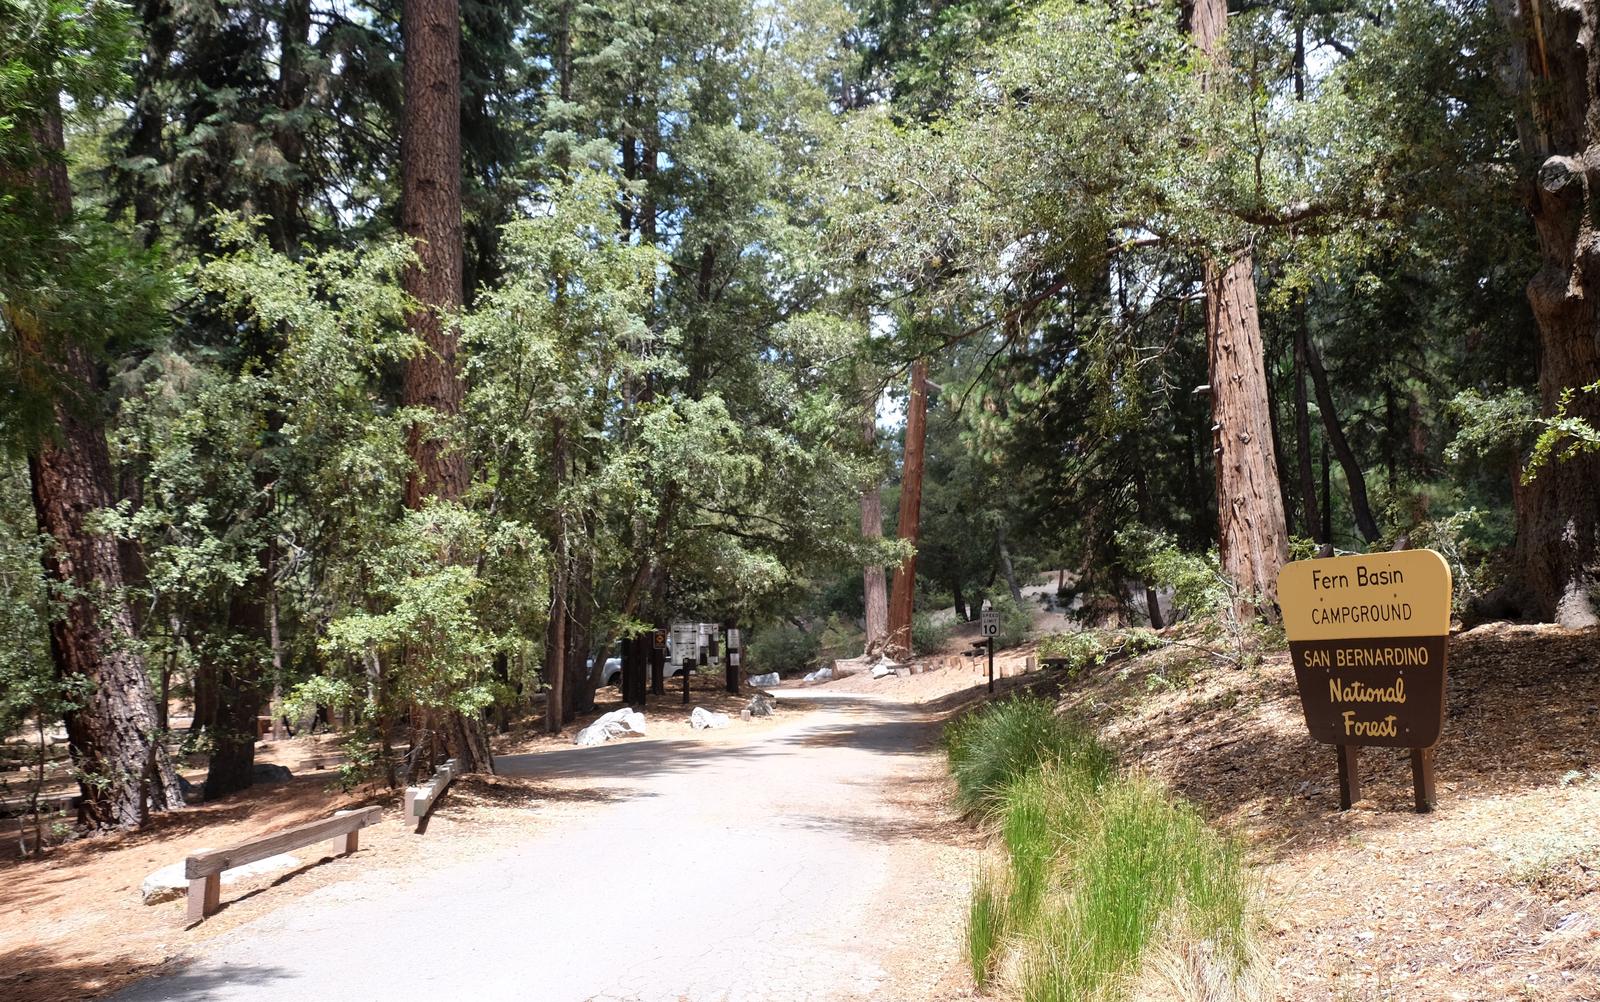 Roadway with Fern Basin Campground sign.